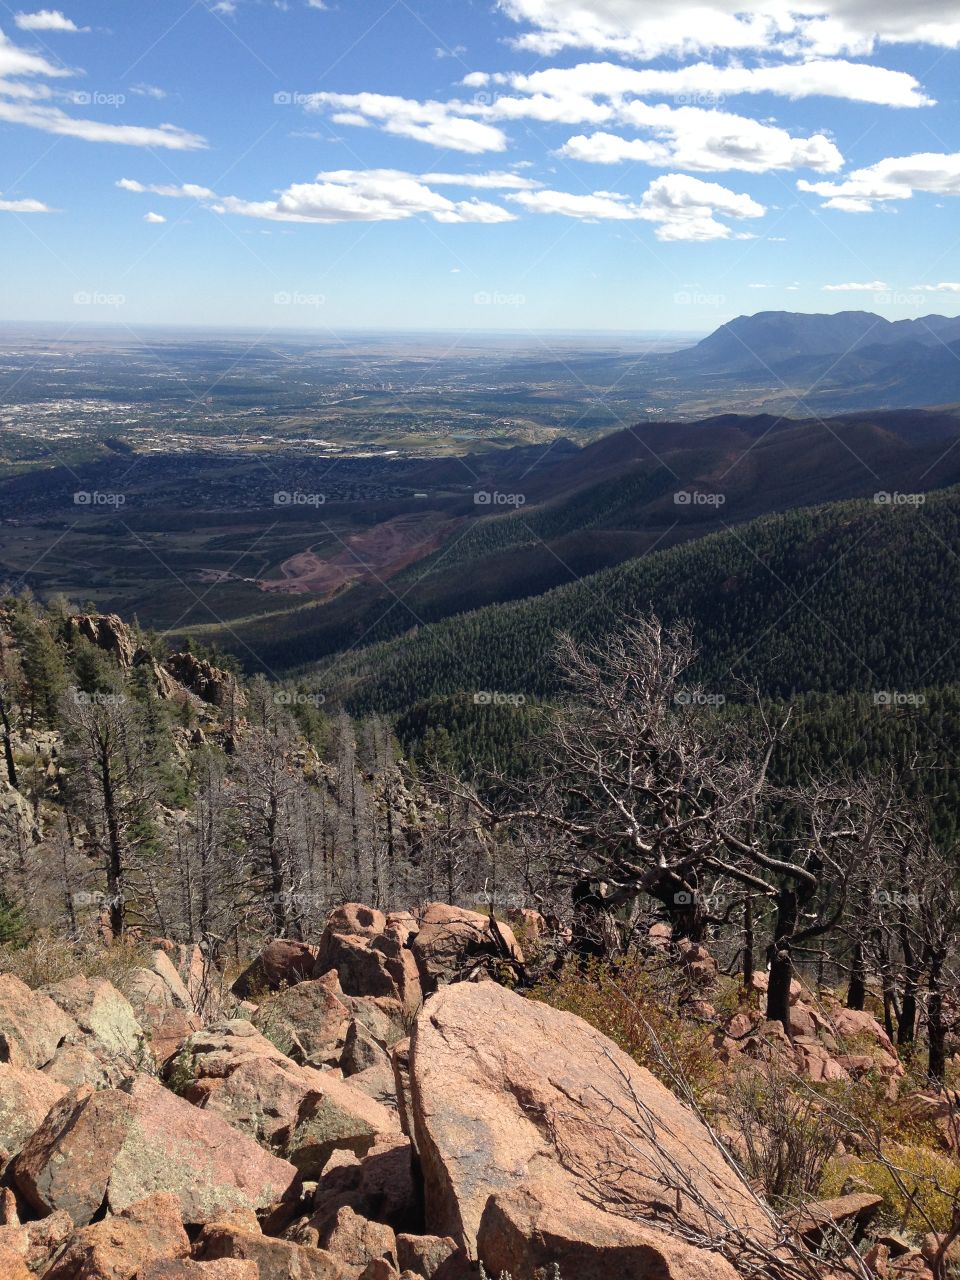 Colorado Springs from the top of Blodgett